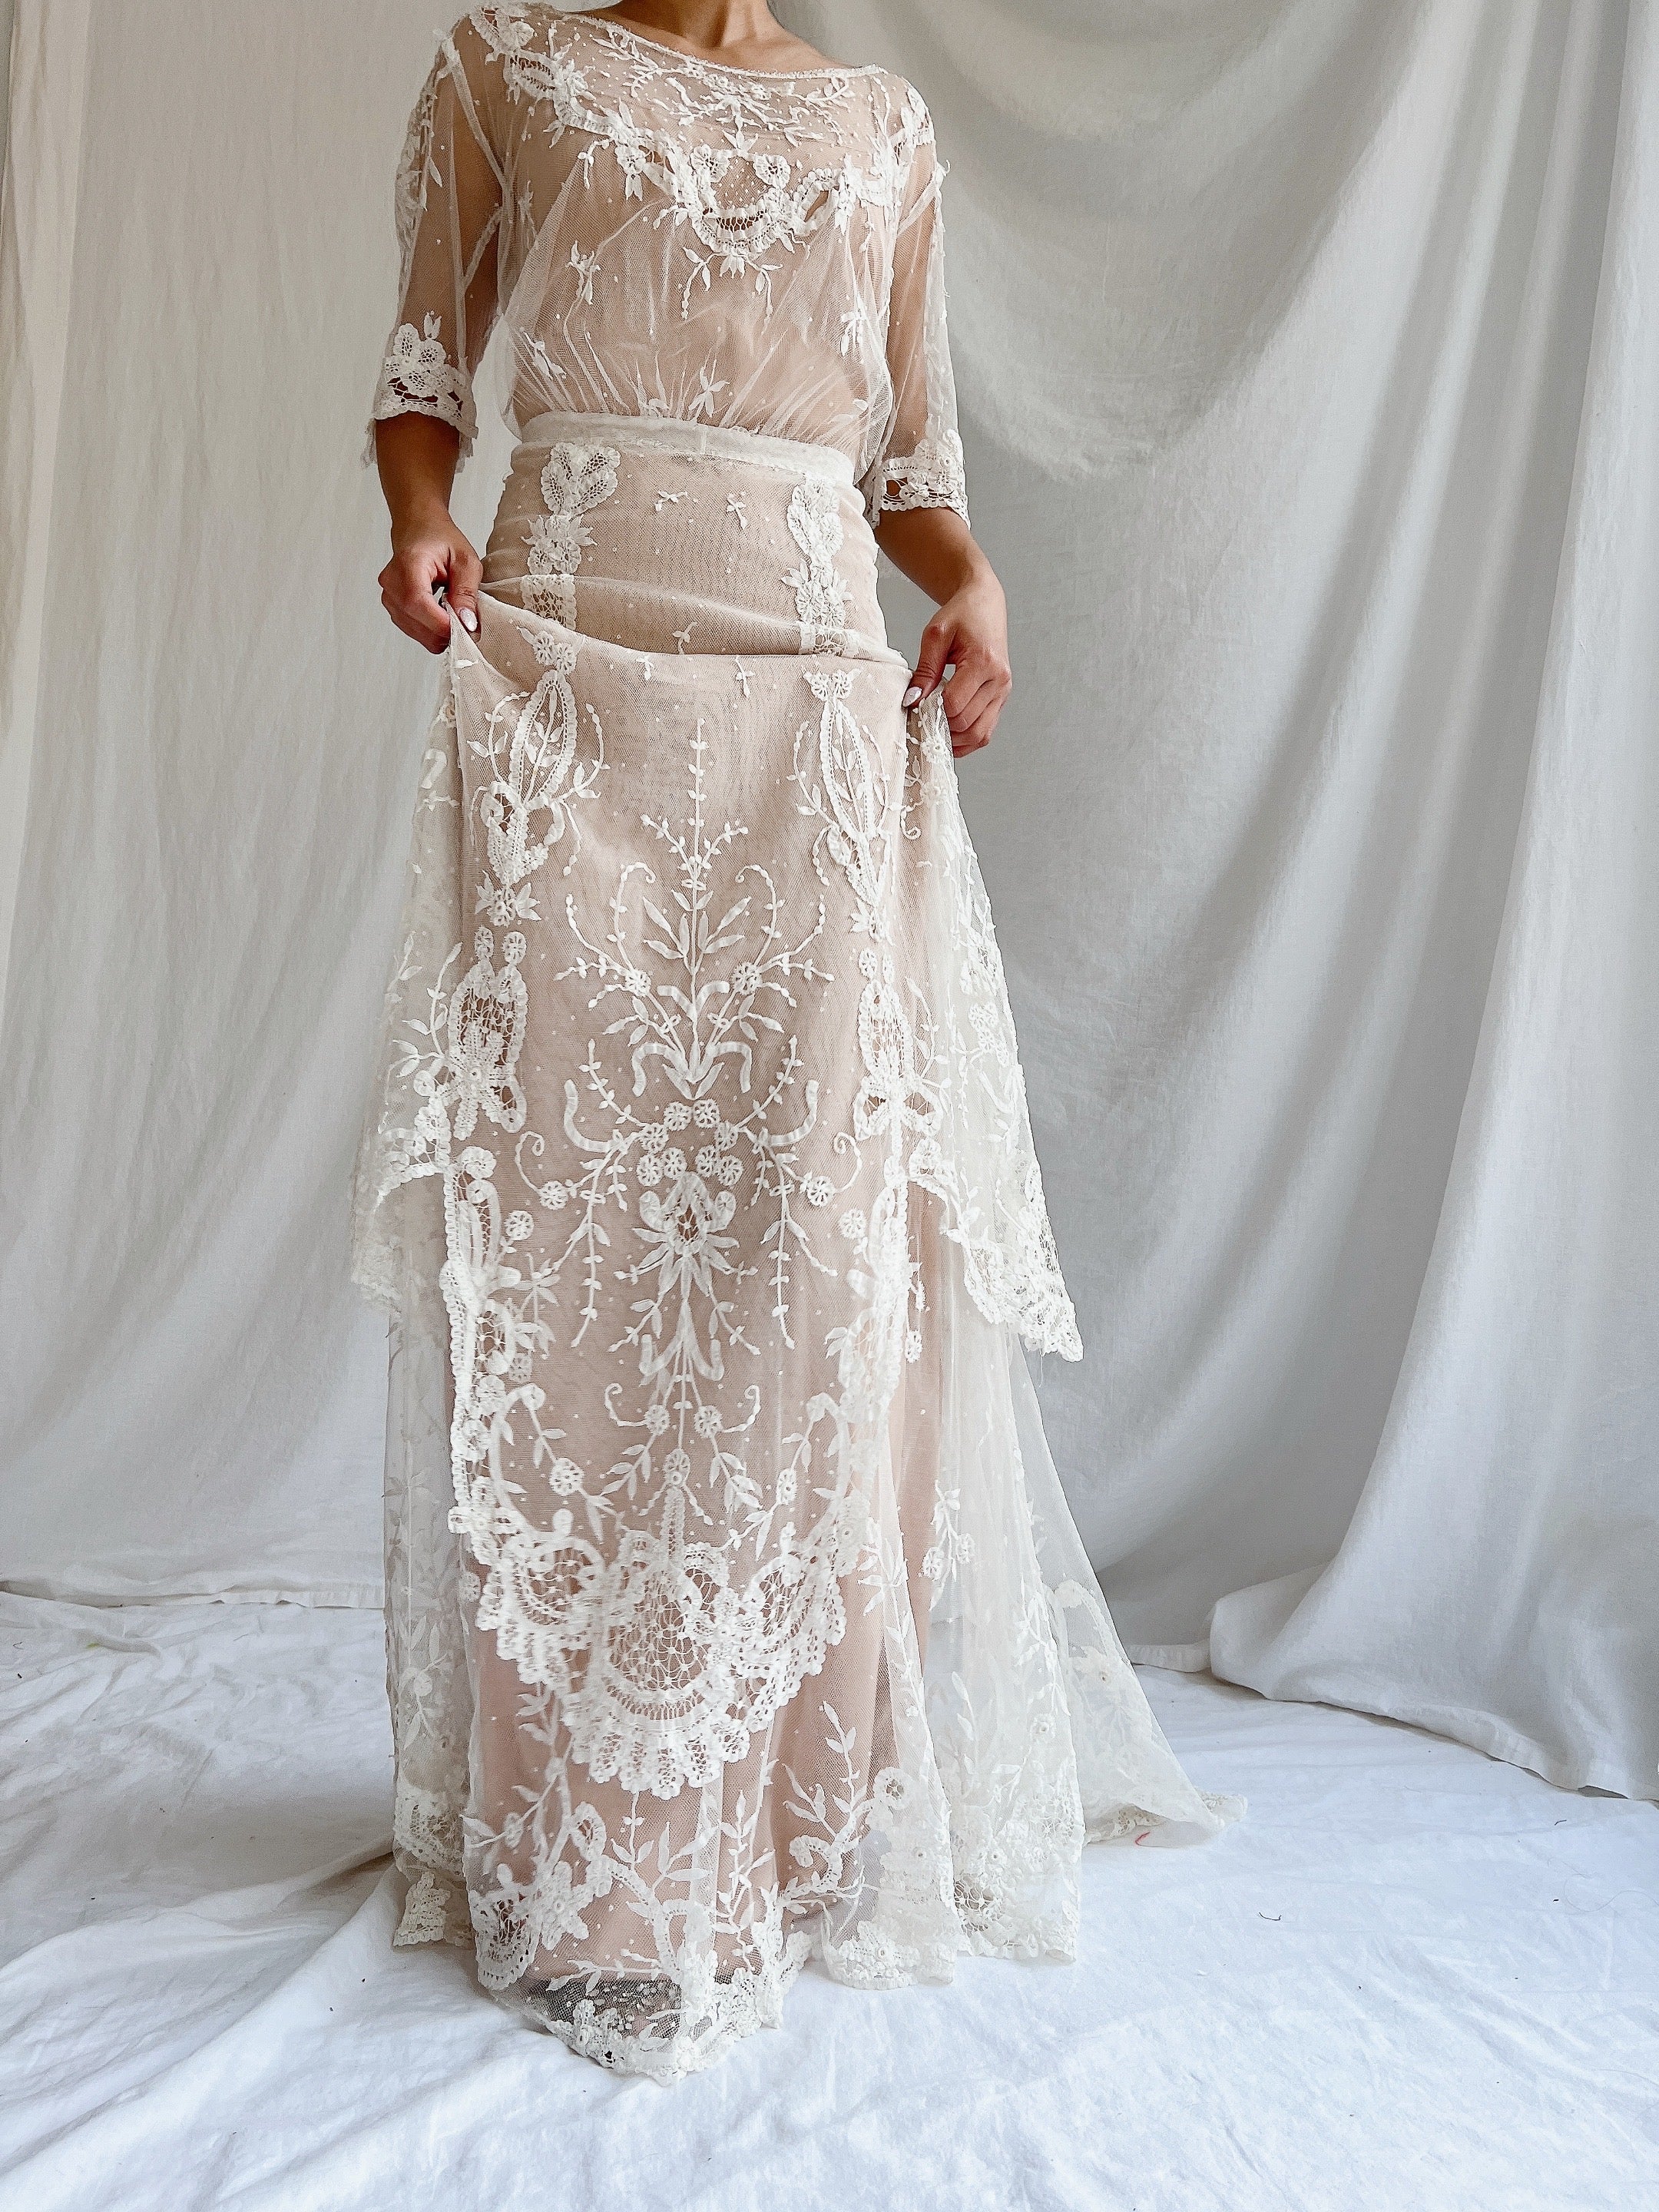 Antique Duchesse Lace Gown with Silk Slip - S